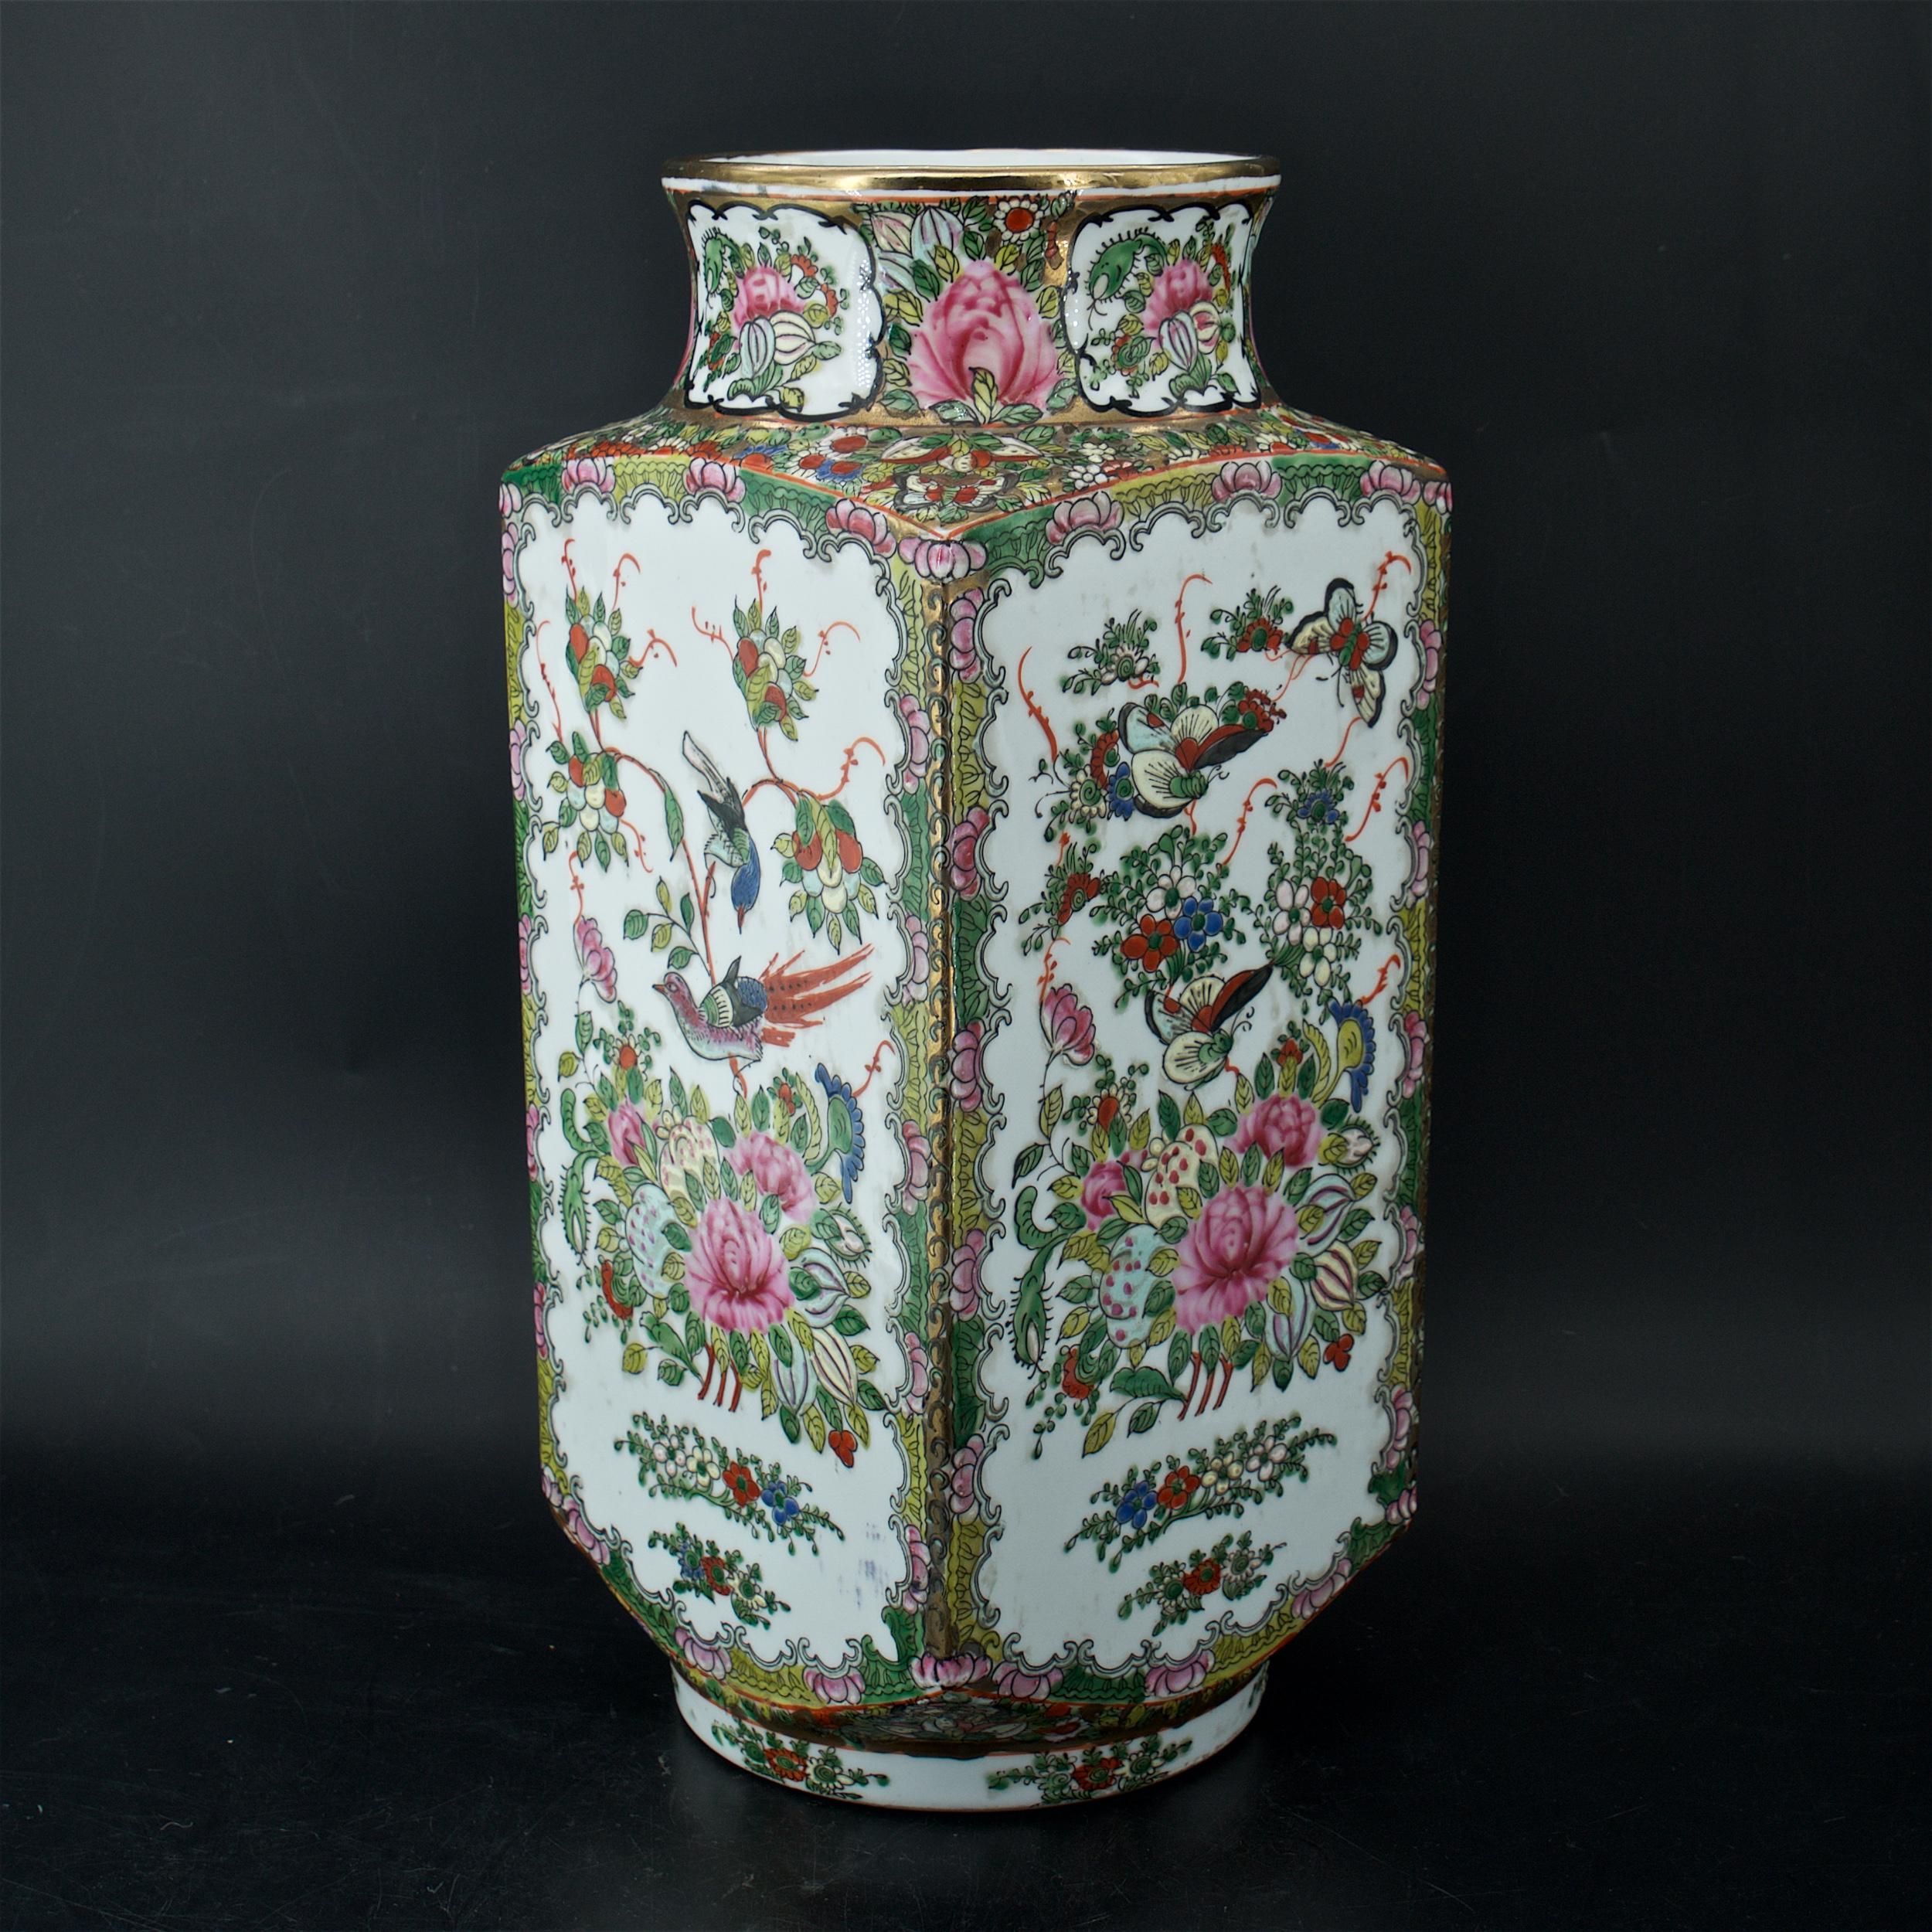 Gilt gold green in the negative spaces, then colorful scenes and borders all on white porcelain surface. An iron-red stamped, ground porcelain Rose Famille vase with Qianlong six-character seal mark, mid-20th century Macao/Macau production. This is